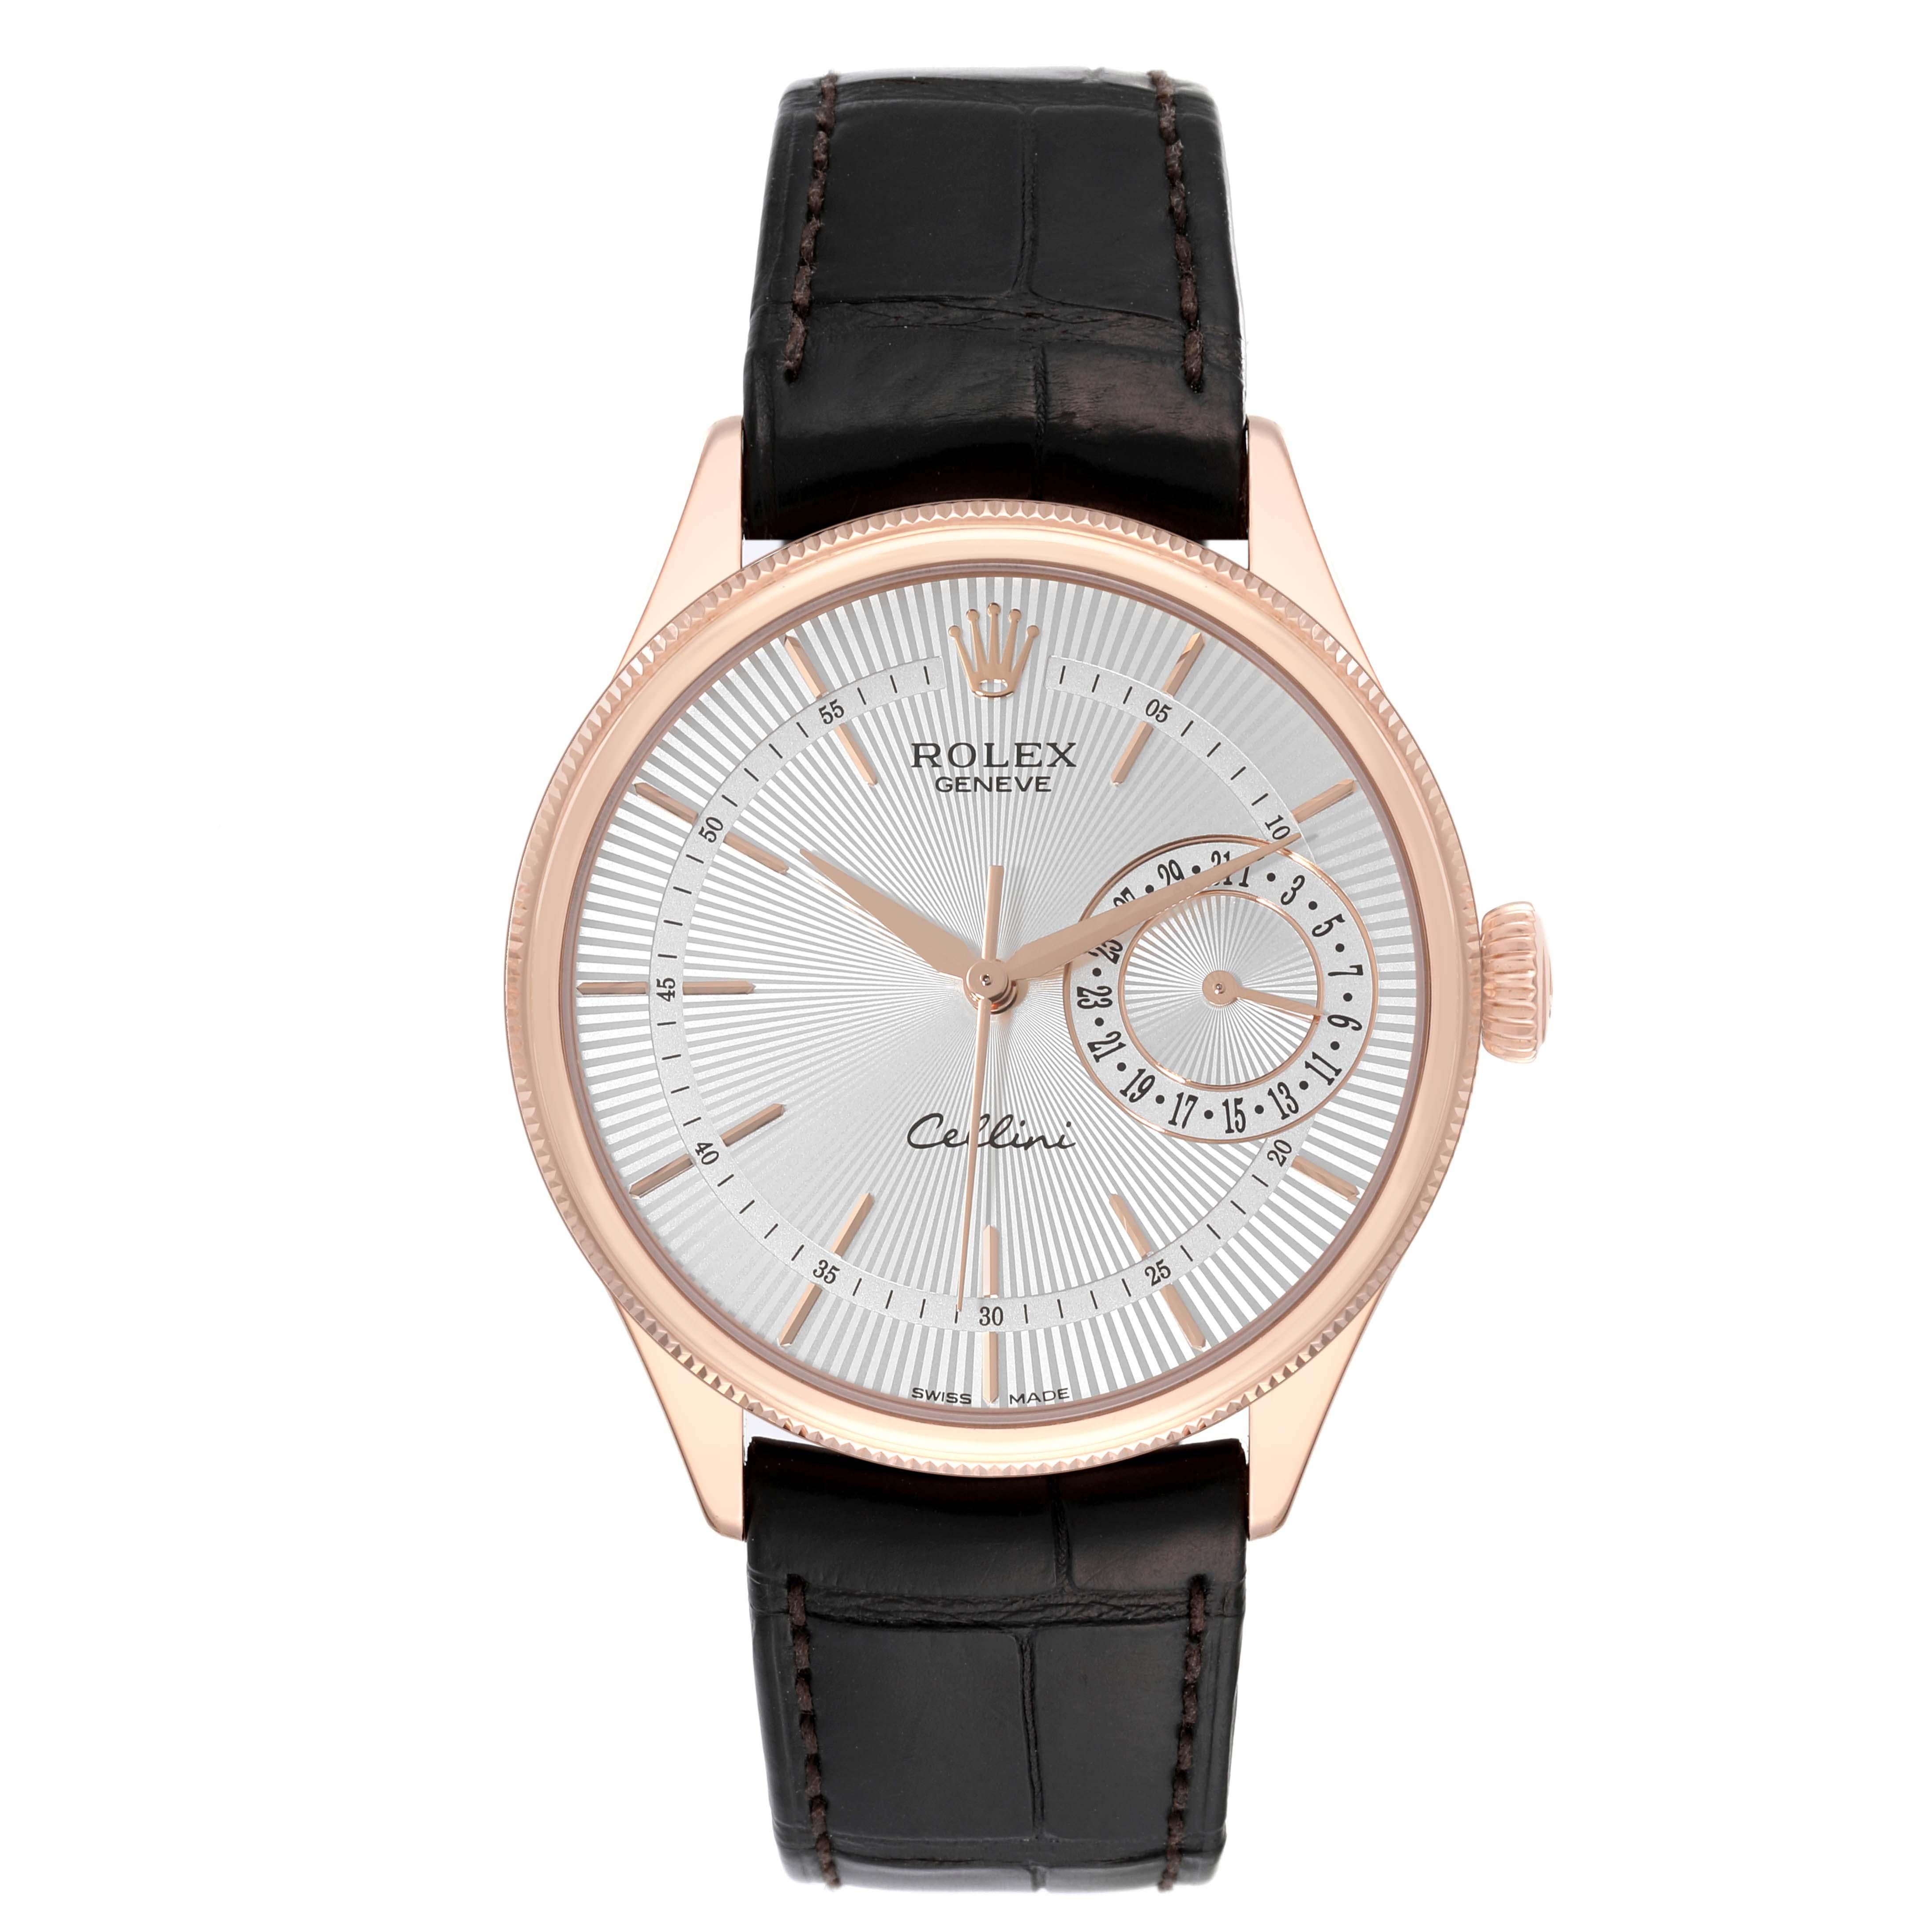 Rolex Cellini Date Rose Gold Silver Dial Mens Watch 50515. Automatic self-winding movement. Officially certified Swiss chronometer (COSC). Paramagnetic blue Parachrom hairspring. Bidirectional self-winding via Perpetual rotor. 18K rose gold round